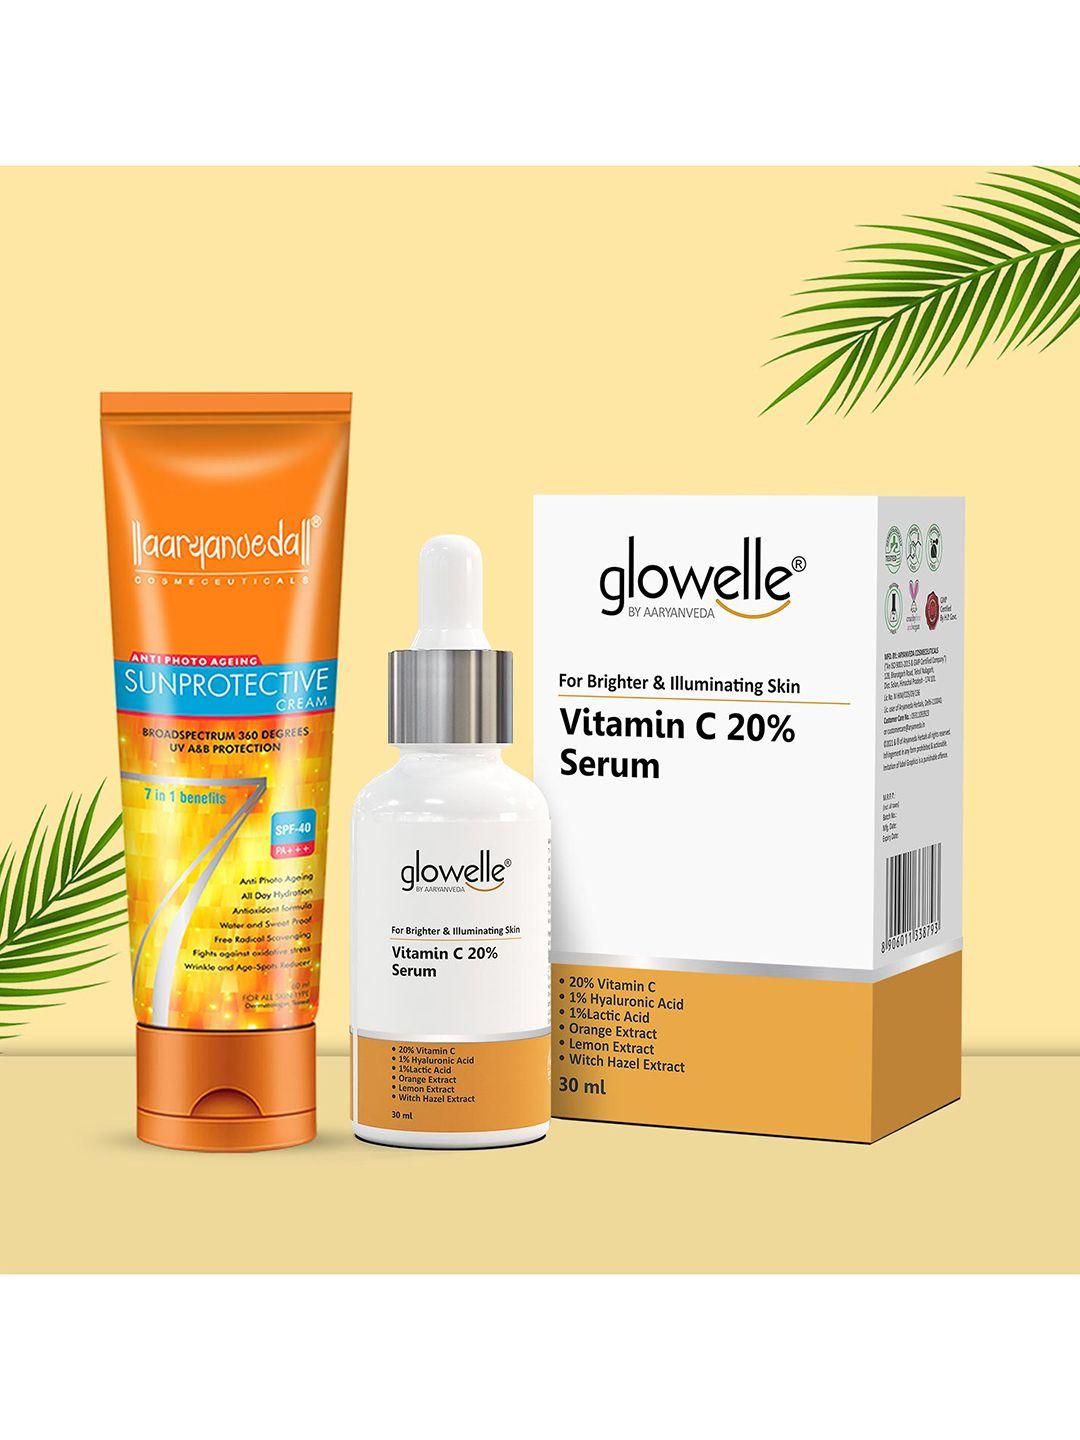 aryanveda sunscreen spf 40 pa+++ with glowelle vitamin c face serum for illuminated skin-90g each